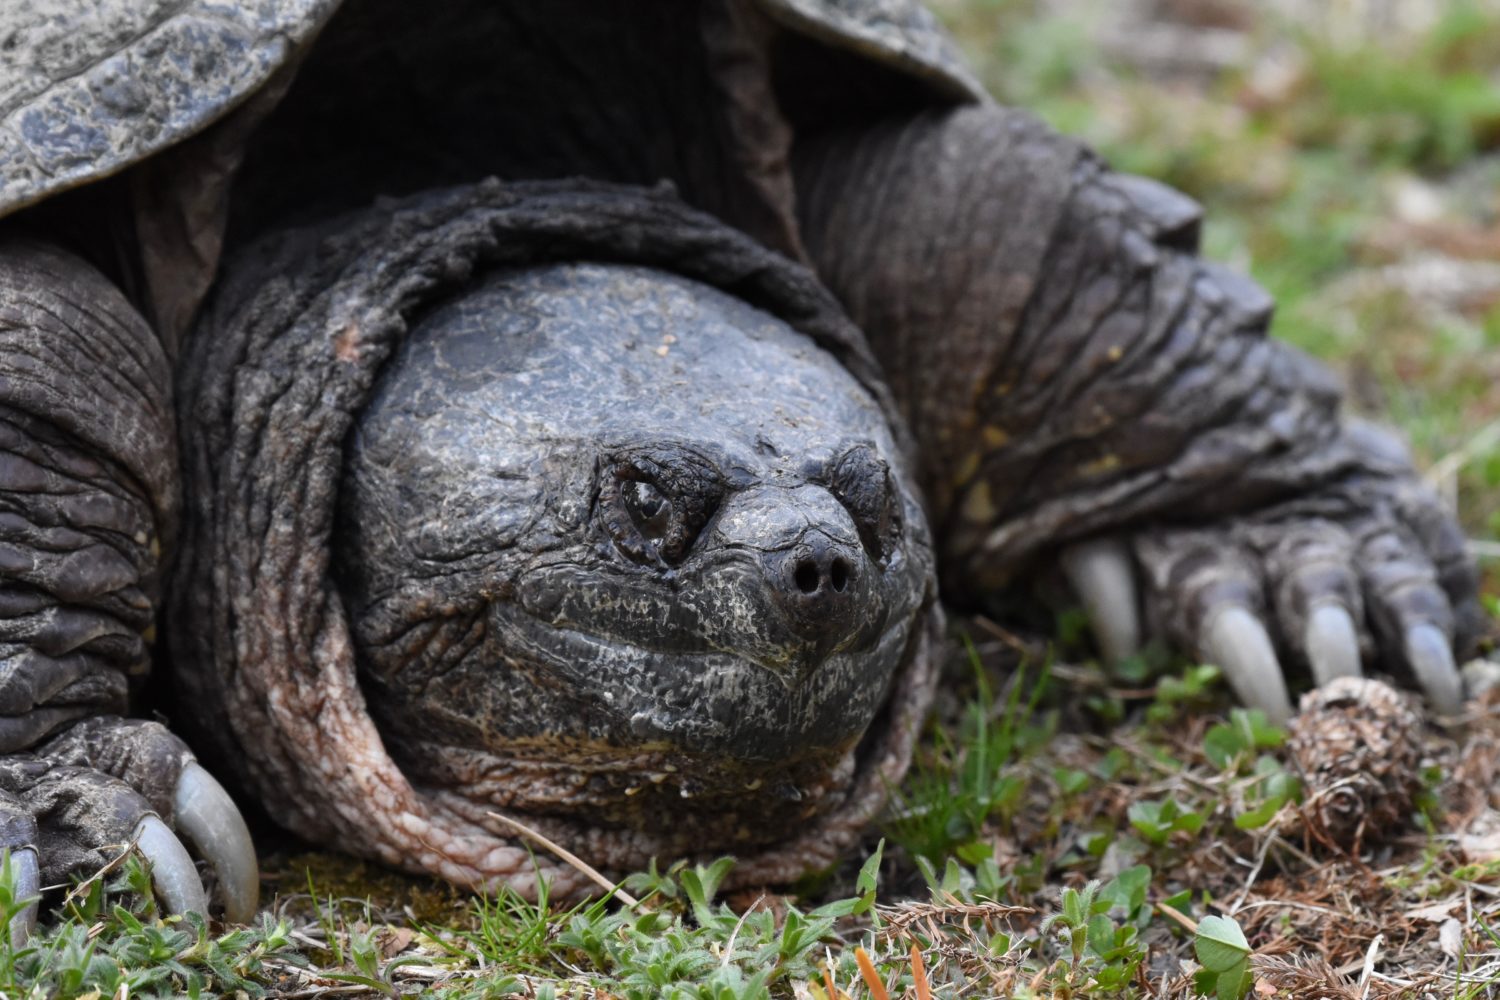 How Far Can A Snapping Turtle Extend Its Neck?